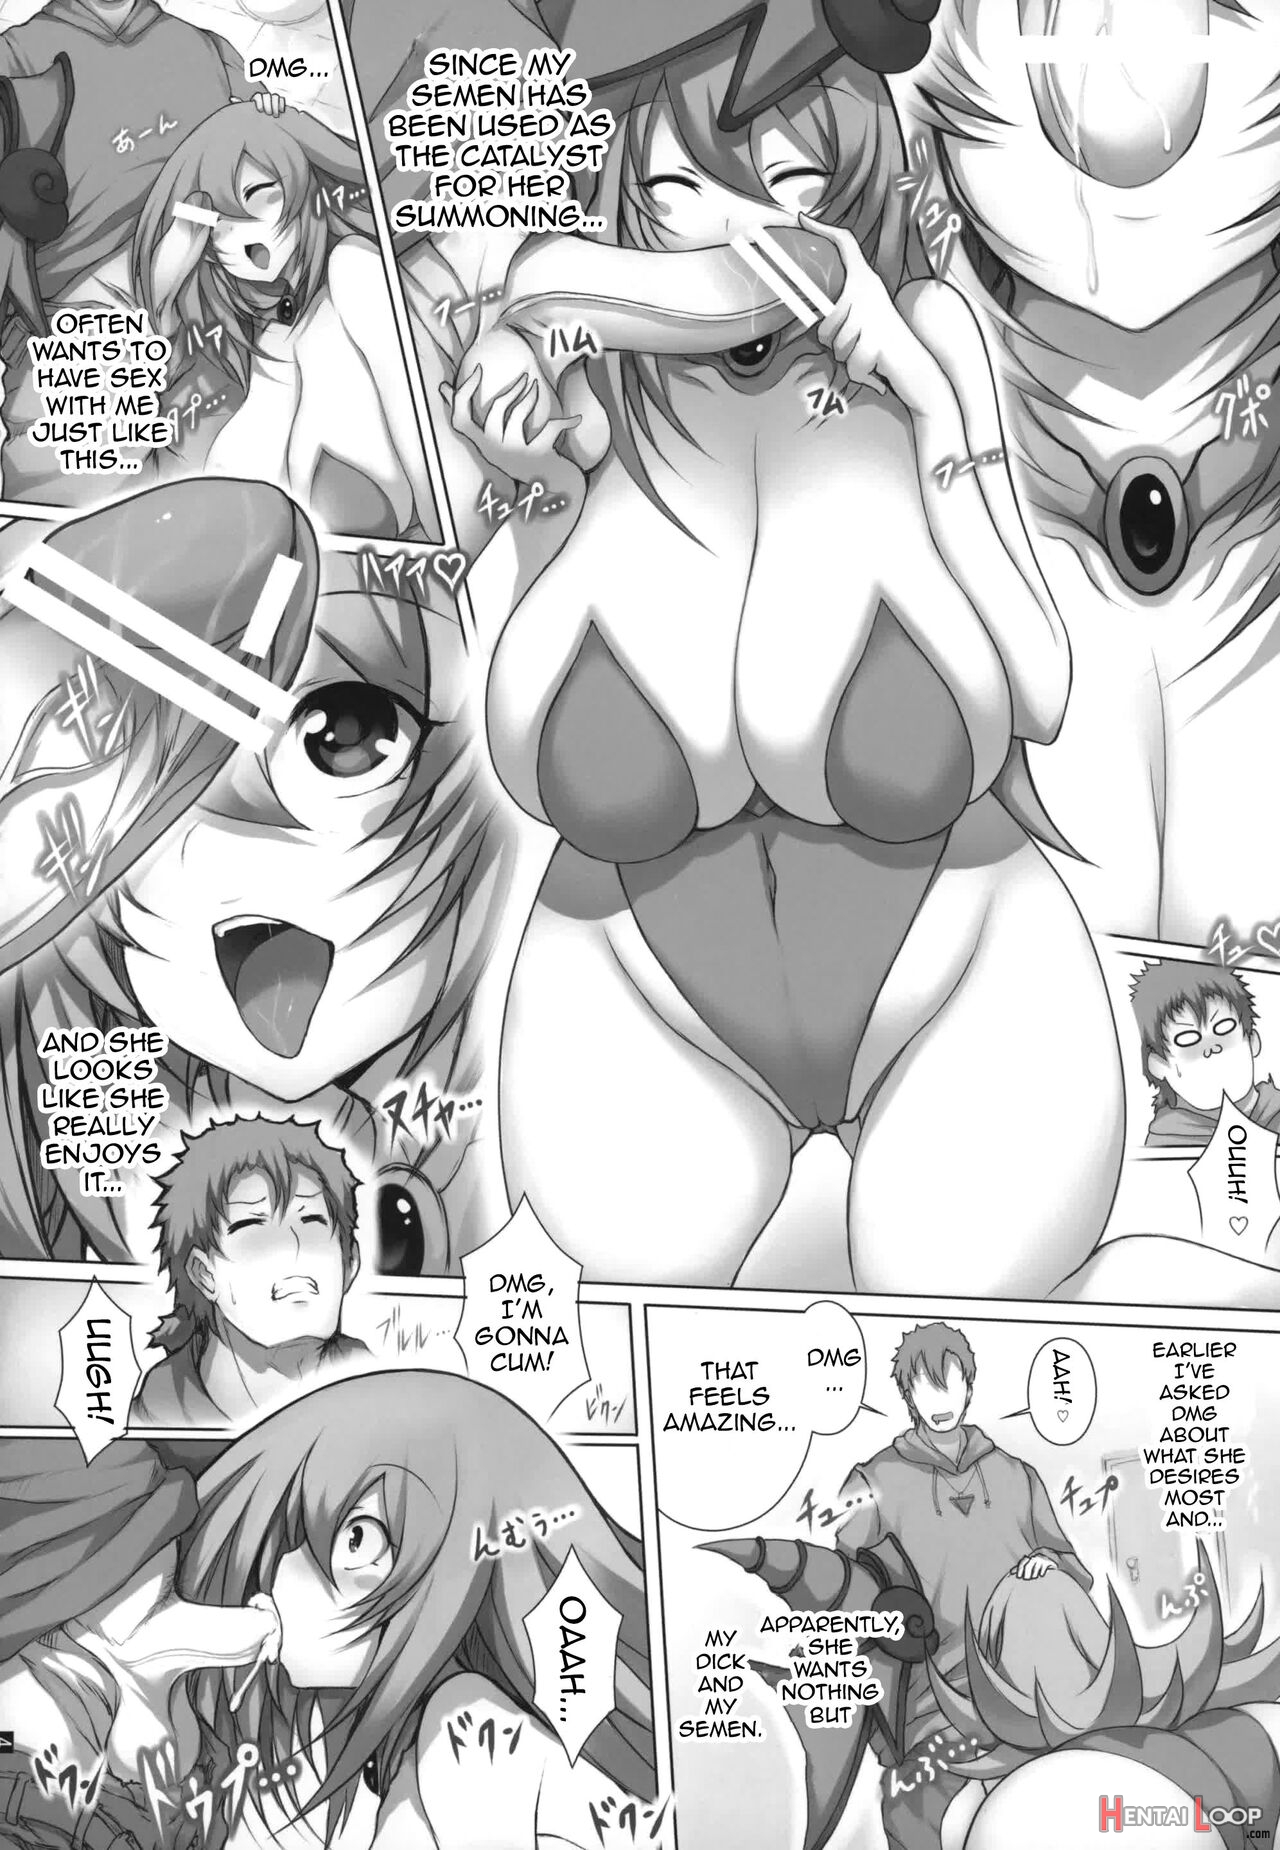 Together With Dark Magician Girl 2 page 5